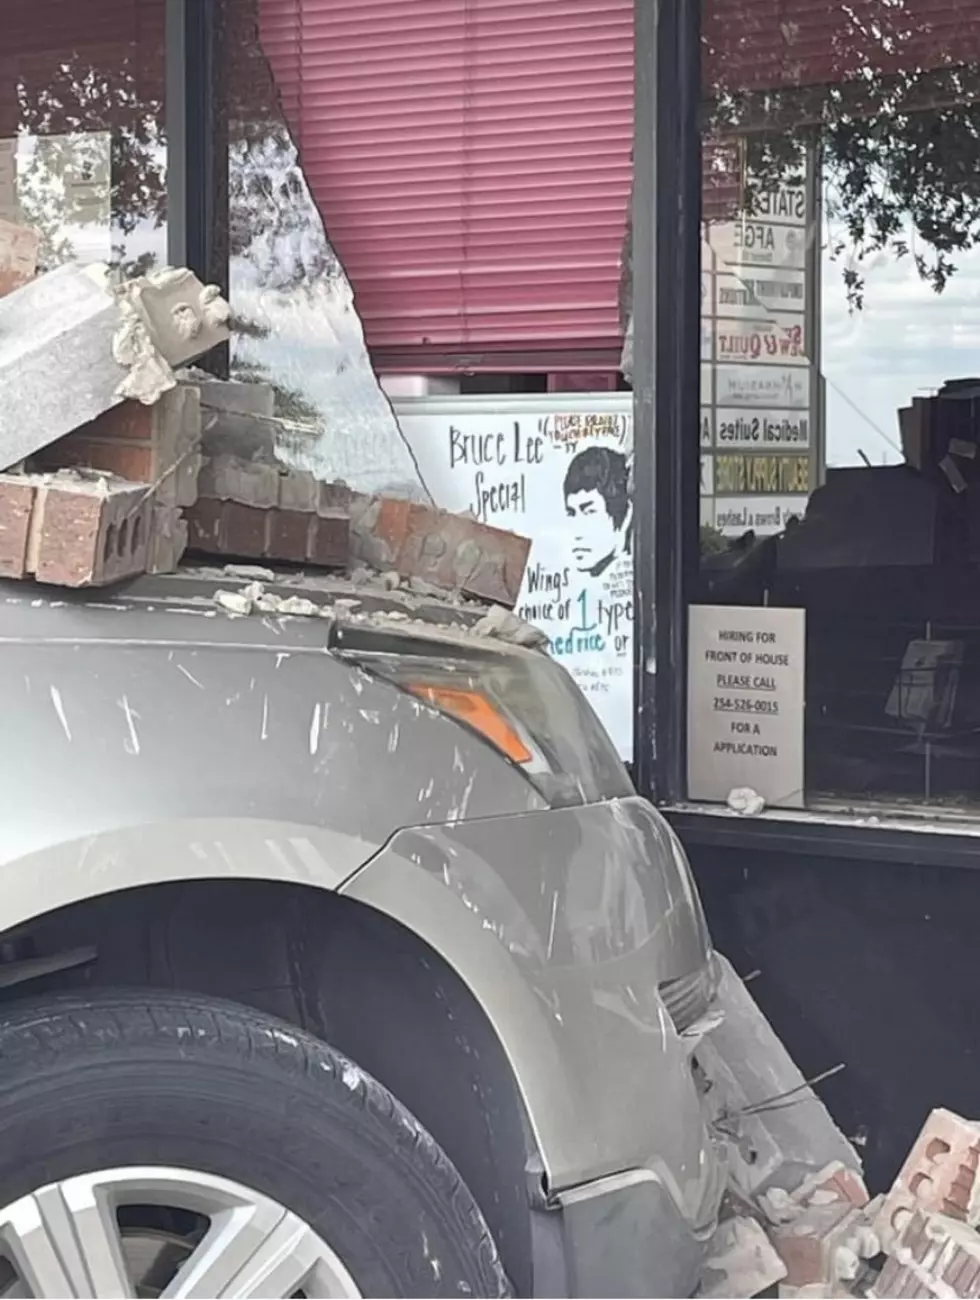 Oh No! Who Crashed Into This Beloved Killeen, Texas Restaurant?